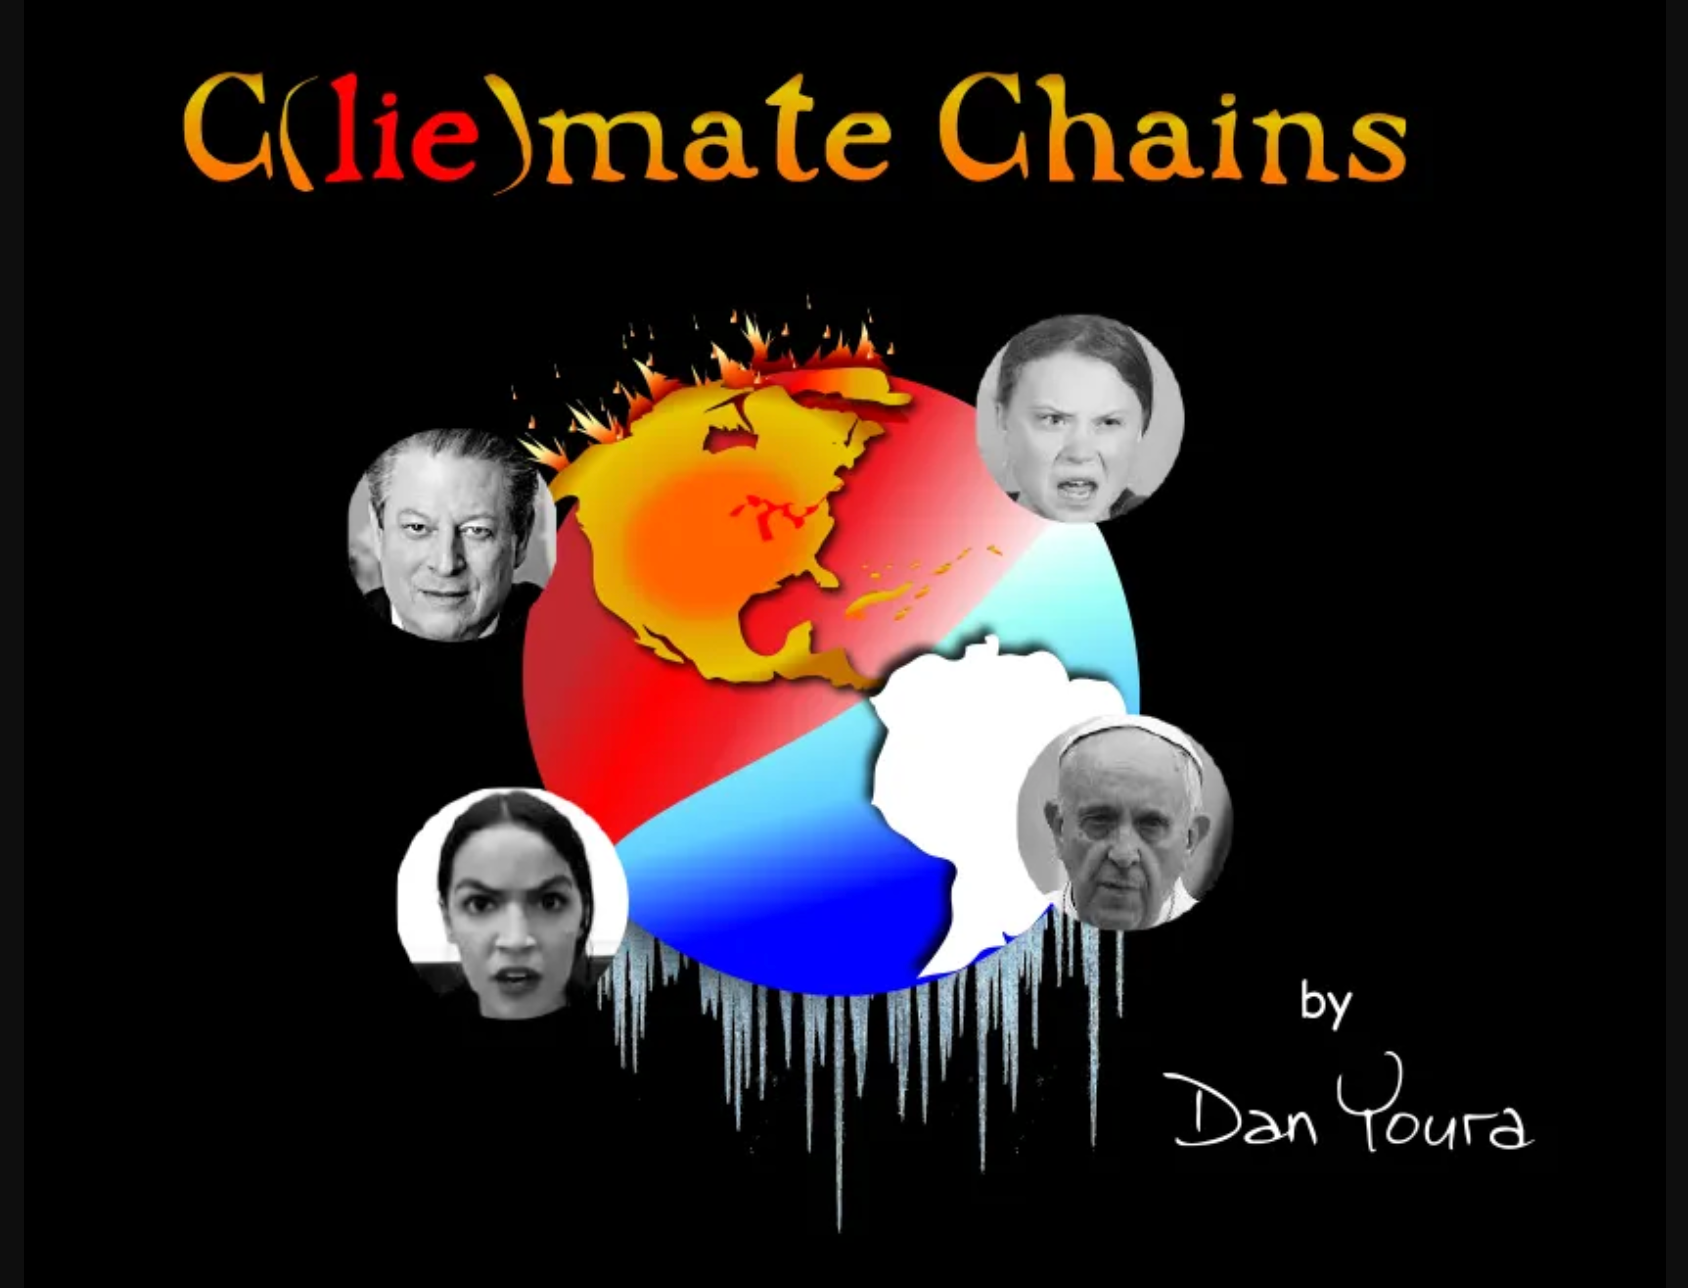 Cliemate Chains by Dan Youra